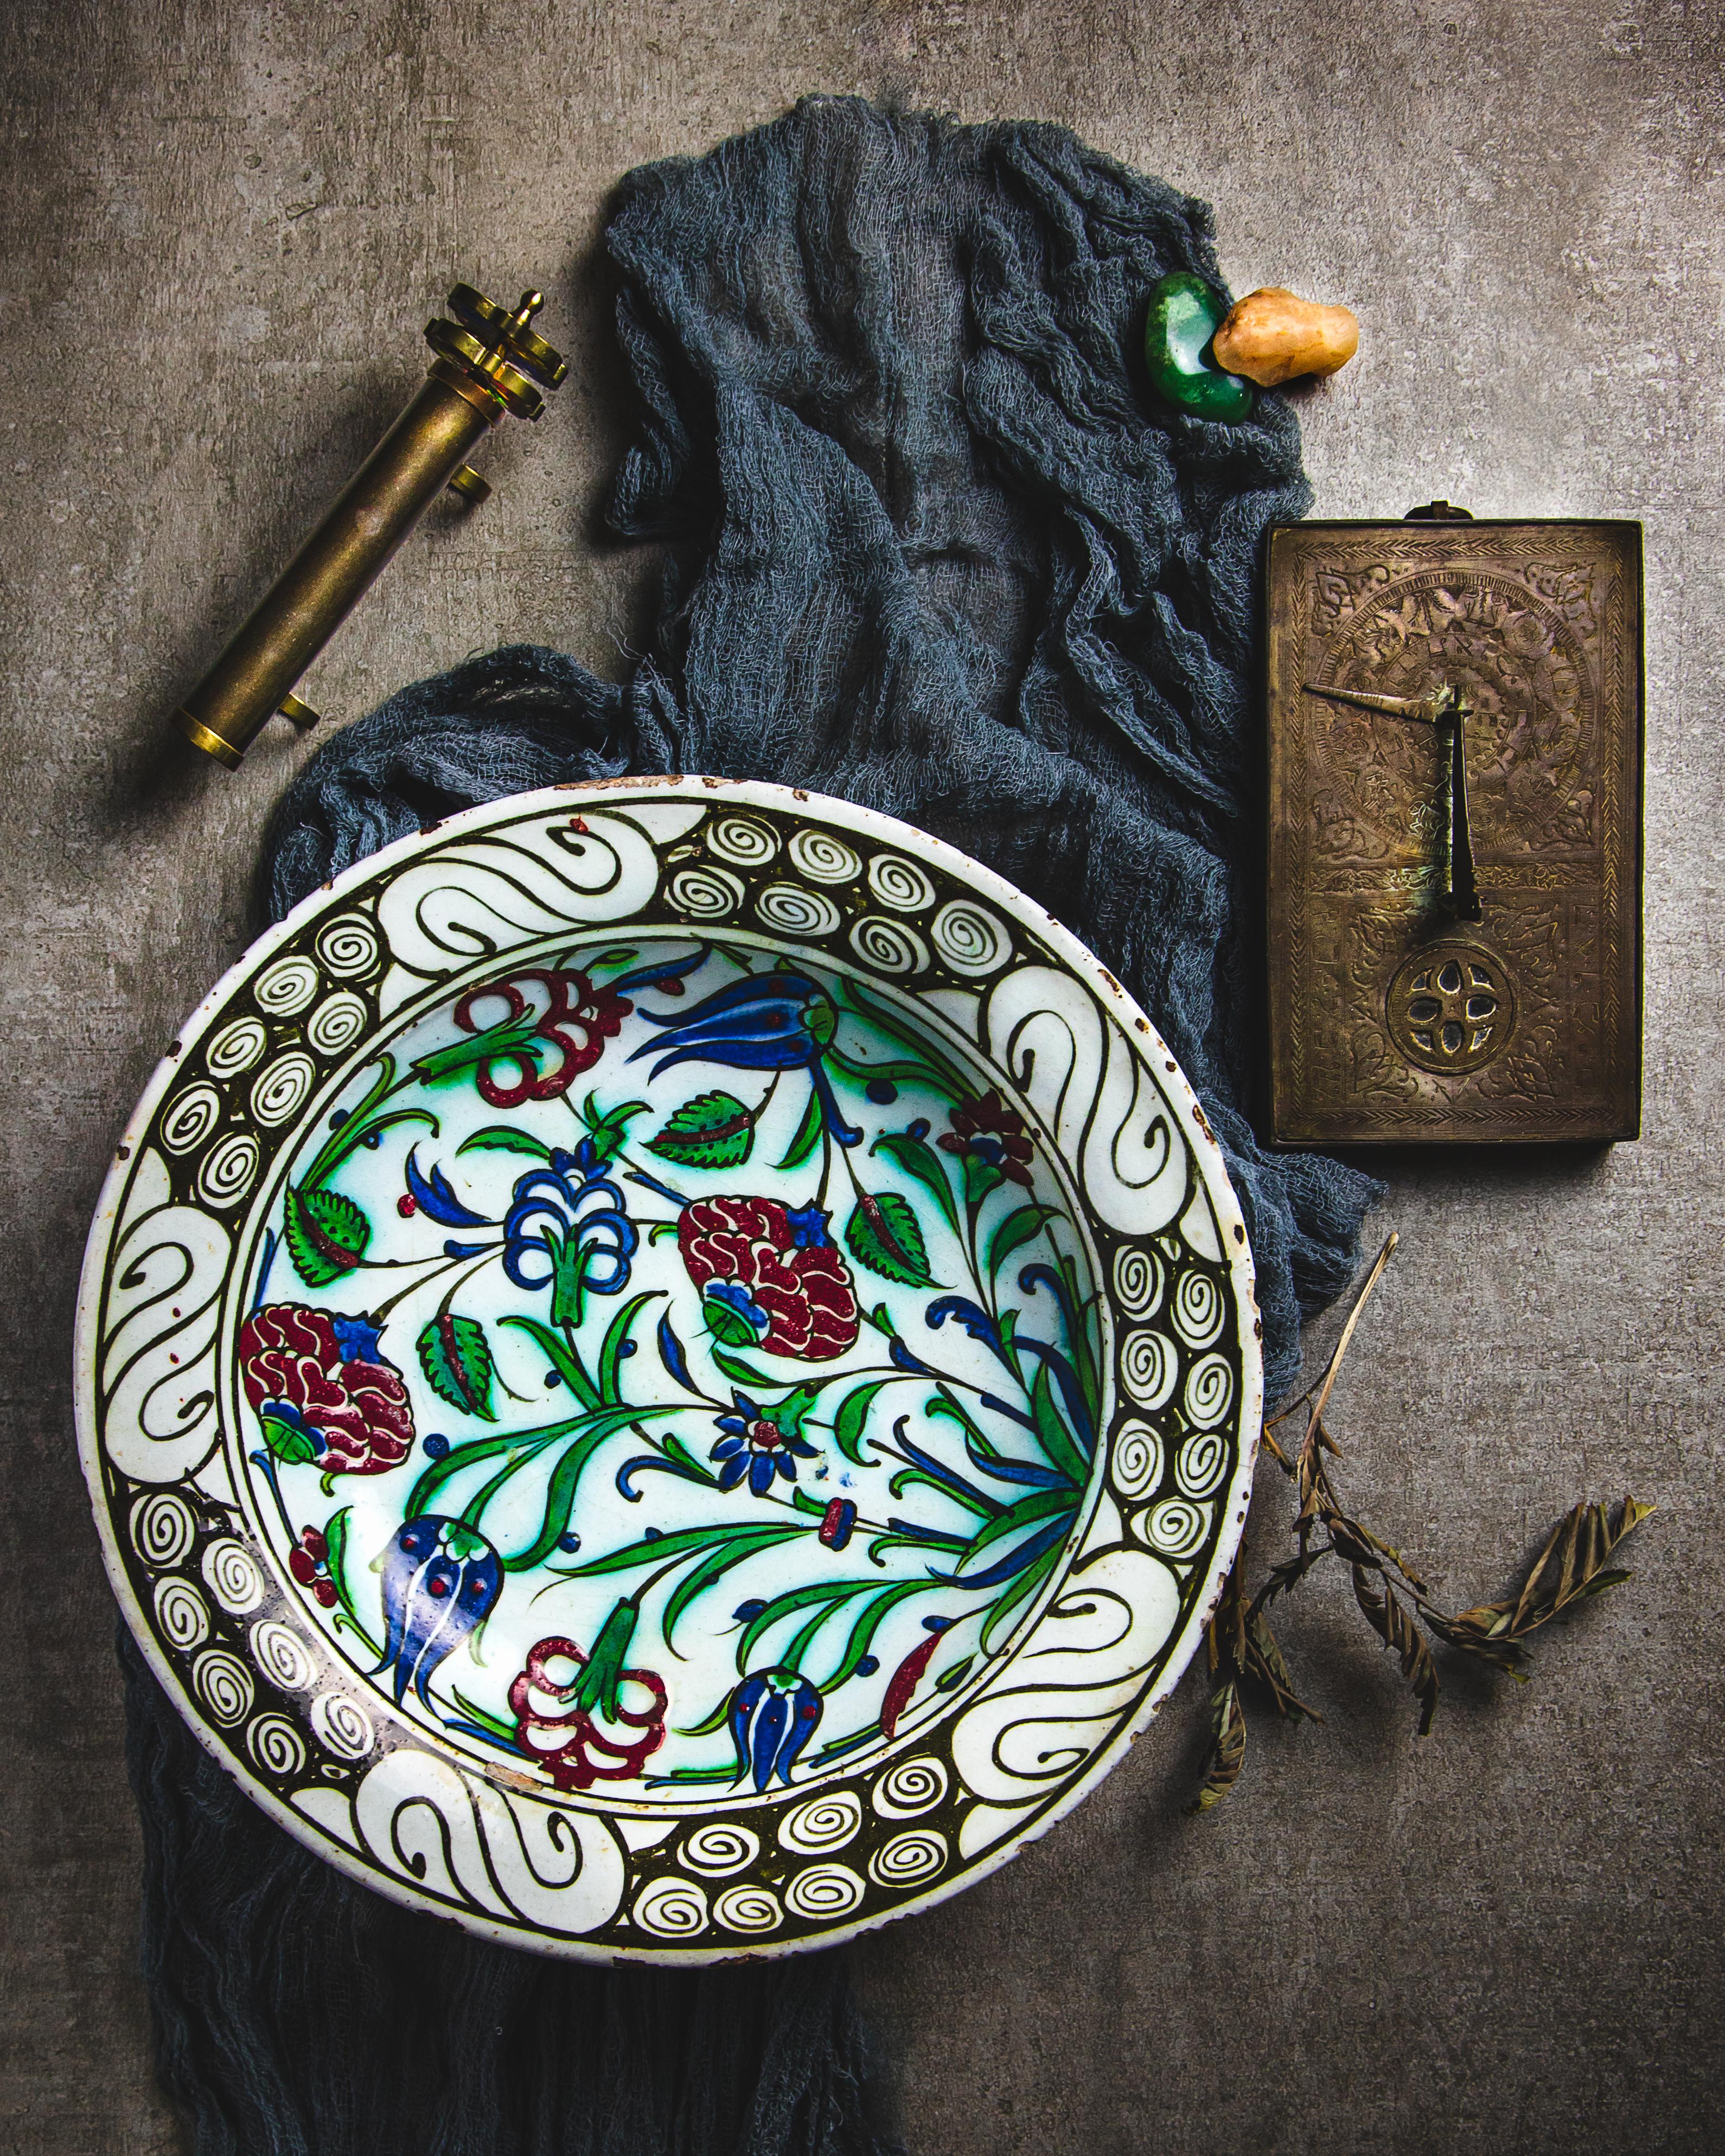 An Iznik pottery dish made in the first half of the 17th century and decorated with chrysanthemums and tulips. The rim features the rock and wave pattern.

Under the direction of Ottoman Sultans, Iznik ceramics blended prestigious Chinese